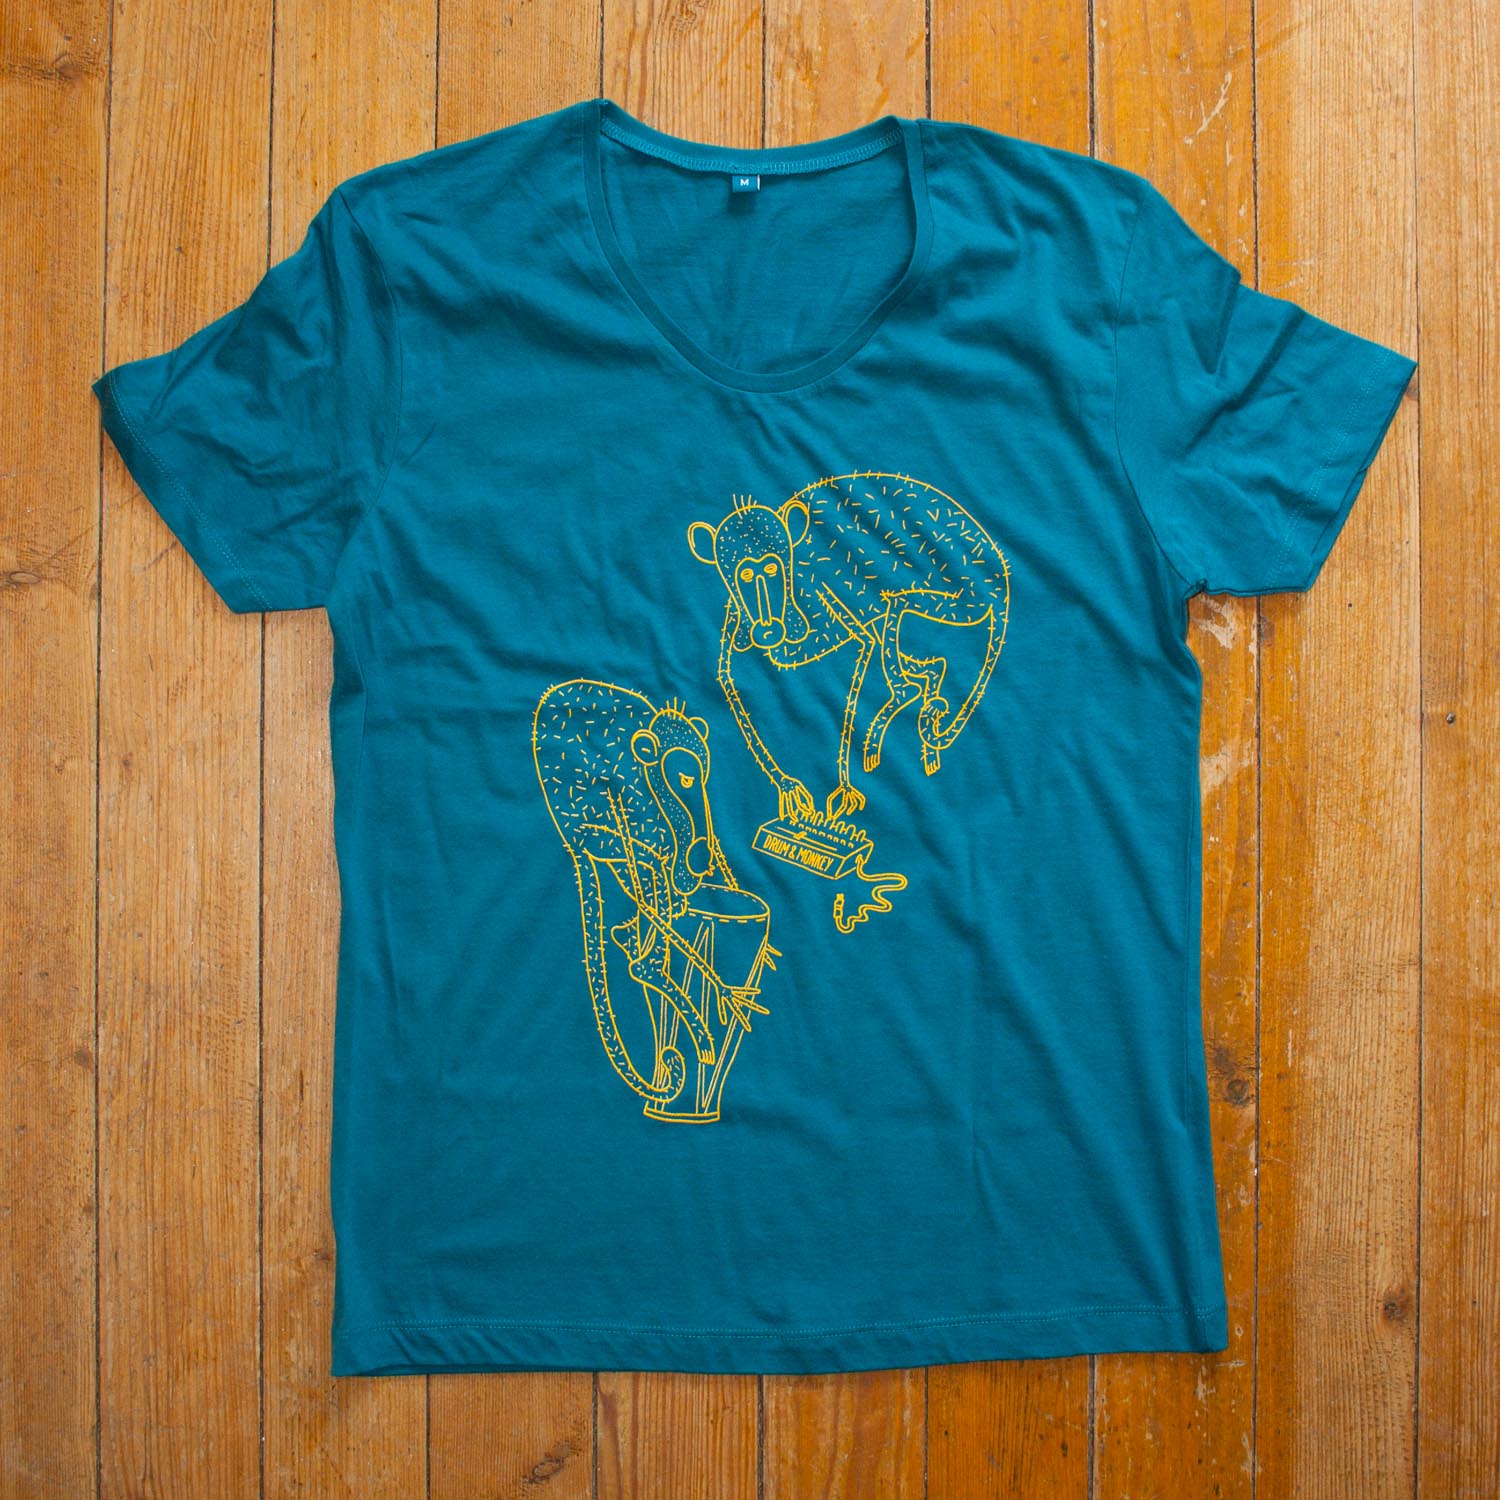 Drum and Monkey Apes T-Shirt 